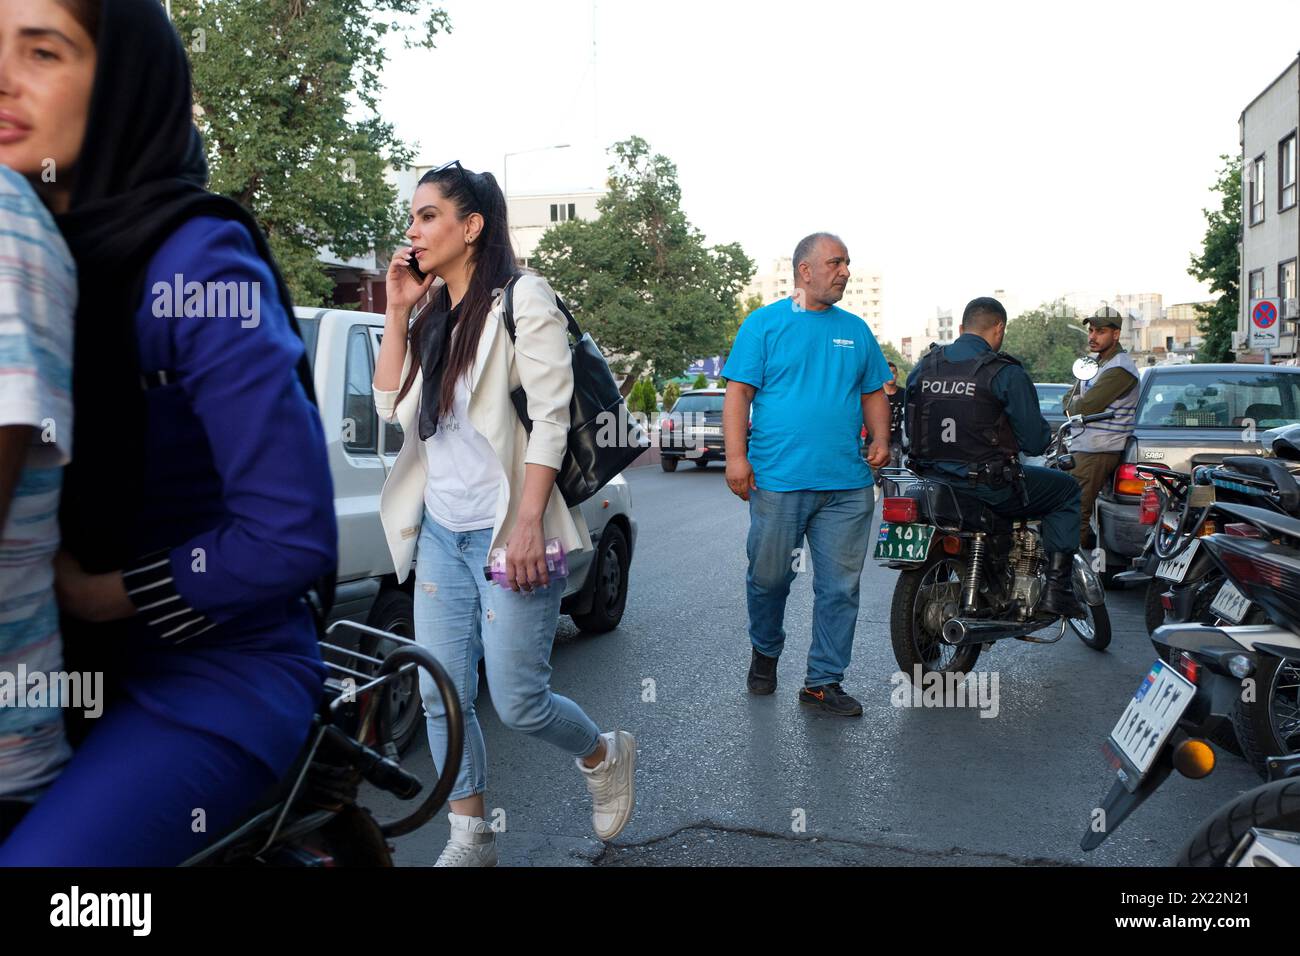 An Iranian Girl in Tehran resisting compulsory hijab by walking without scarfs in public. Stock Photo